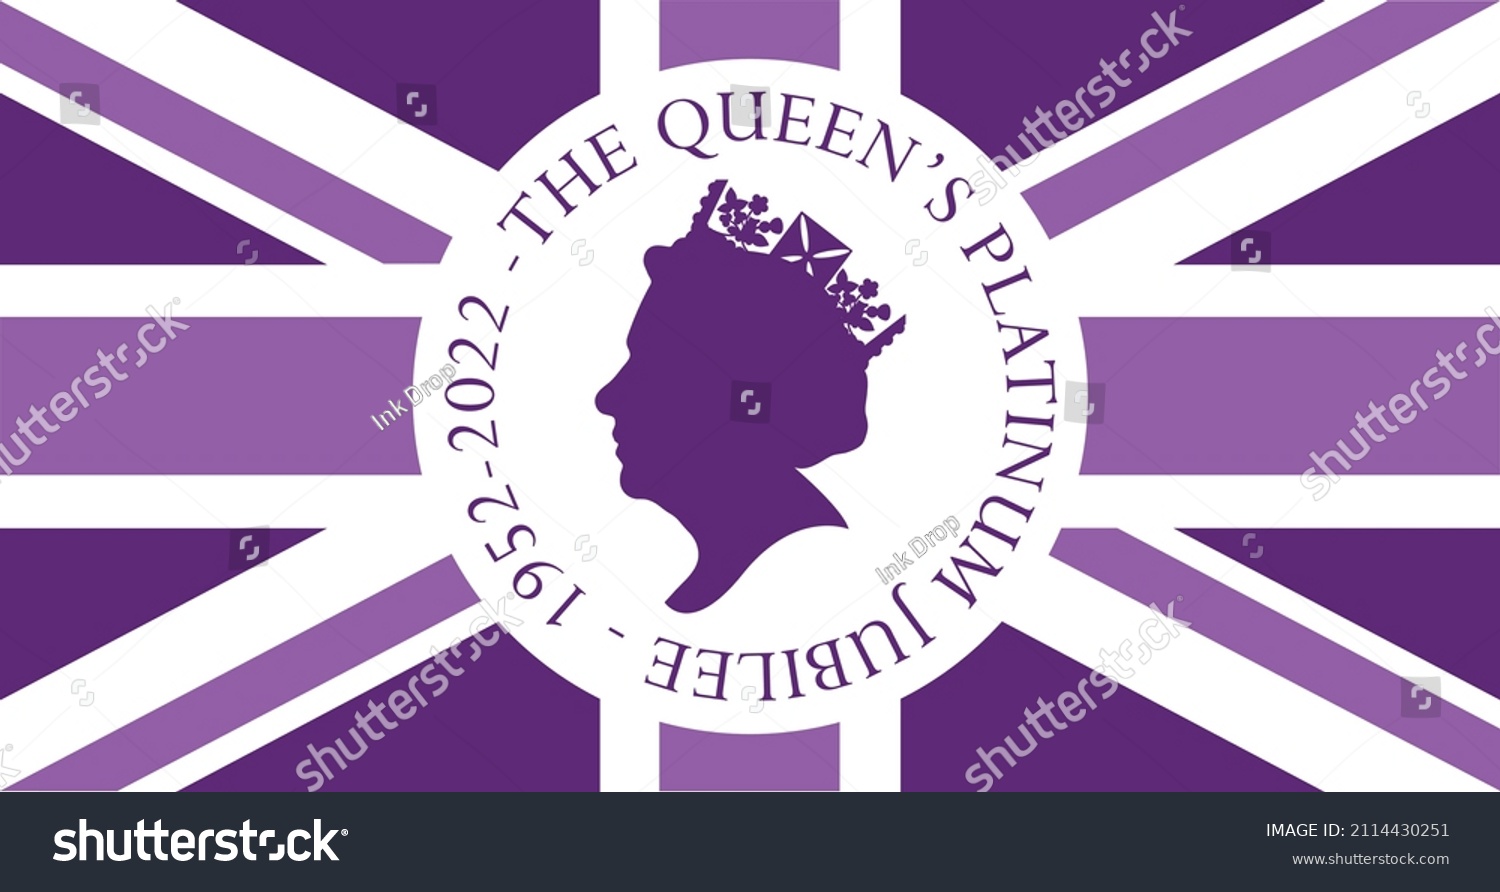 SVG of The Queen's Platinum Jubilee celebration background with side profile of Queen Elizabeth svg